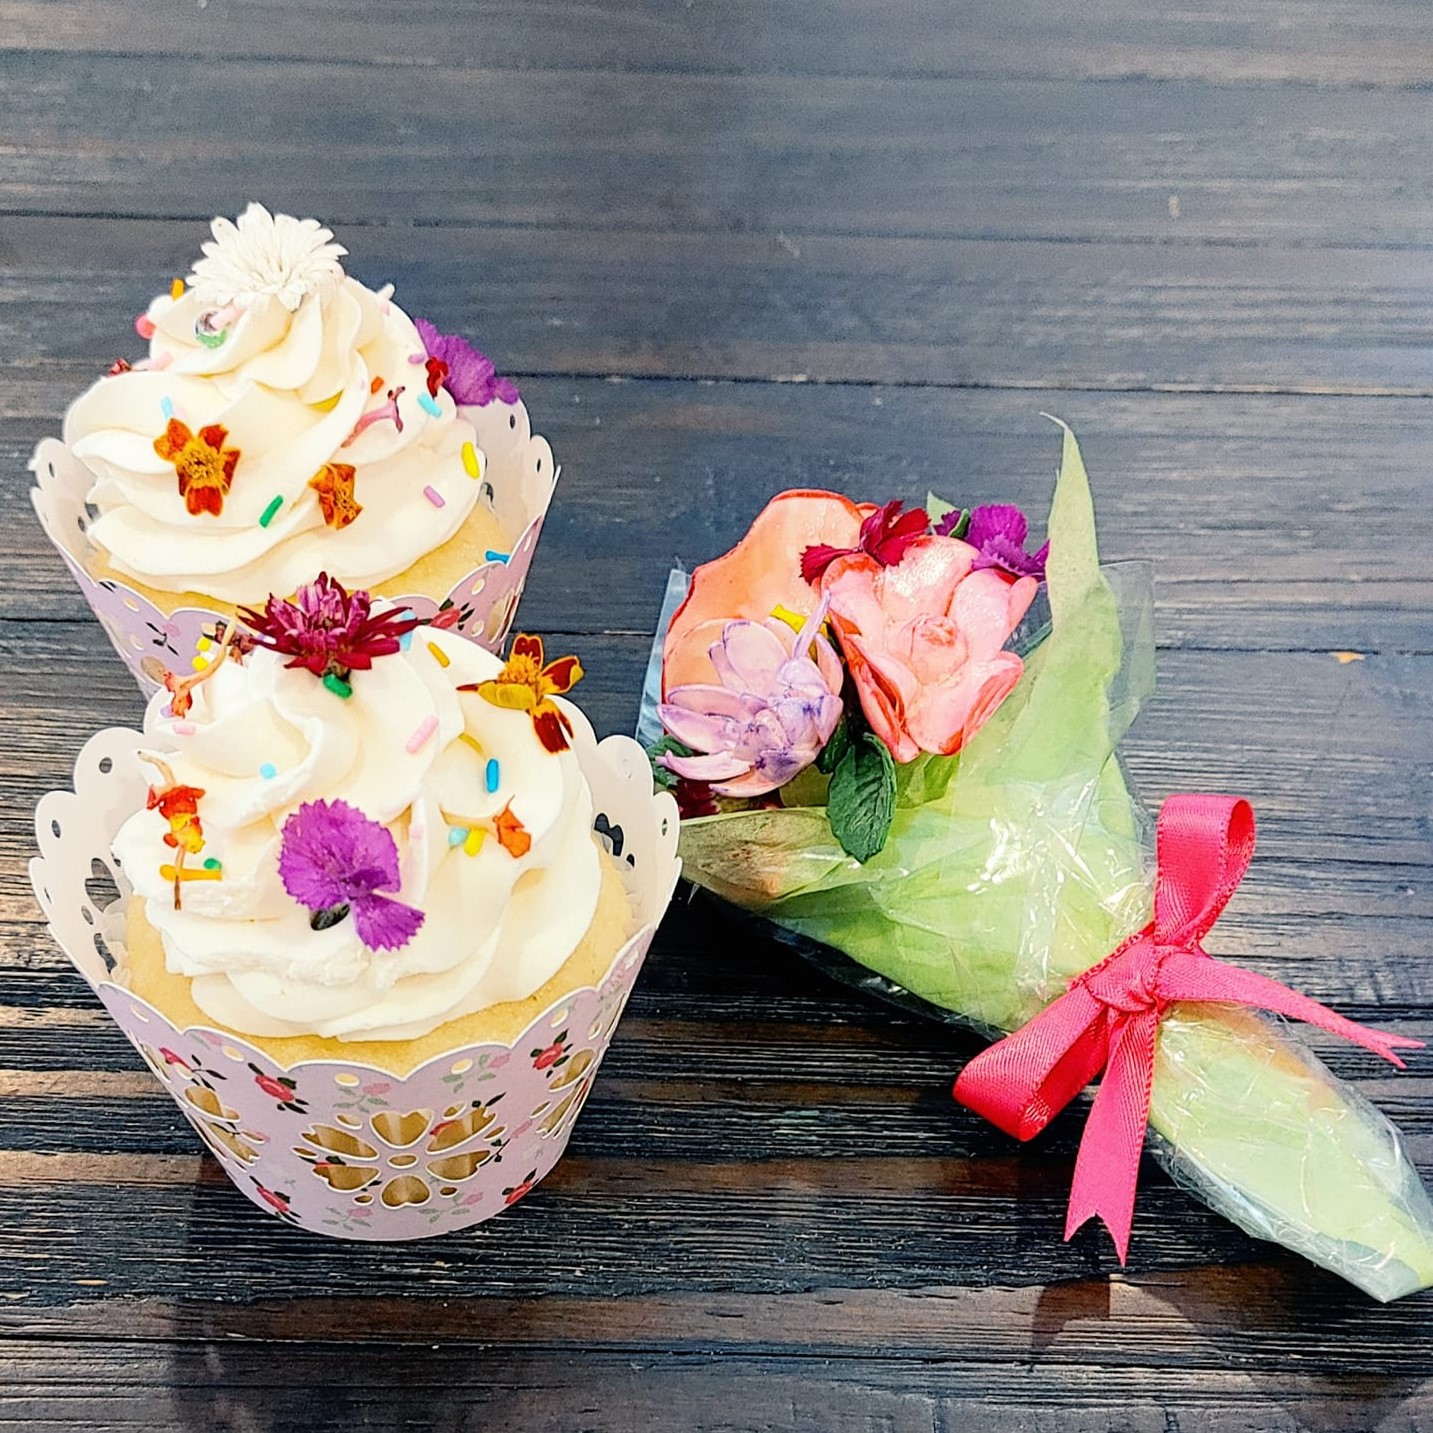 2 white cupcakes with tiny real flowers on them in a pink cupcake liner. There is a small bouquet of flowers beside it in a green wrapper and a pink bow.